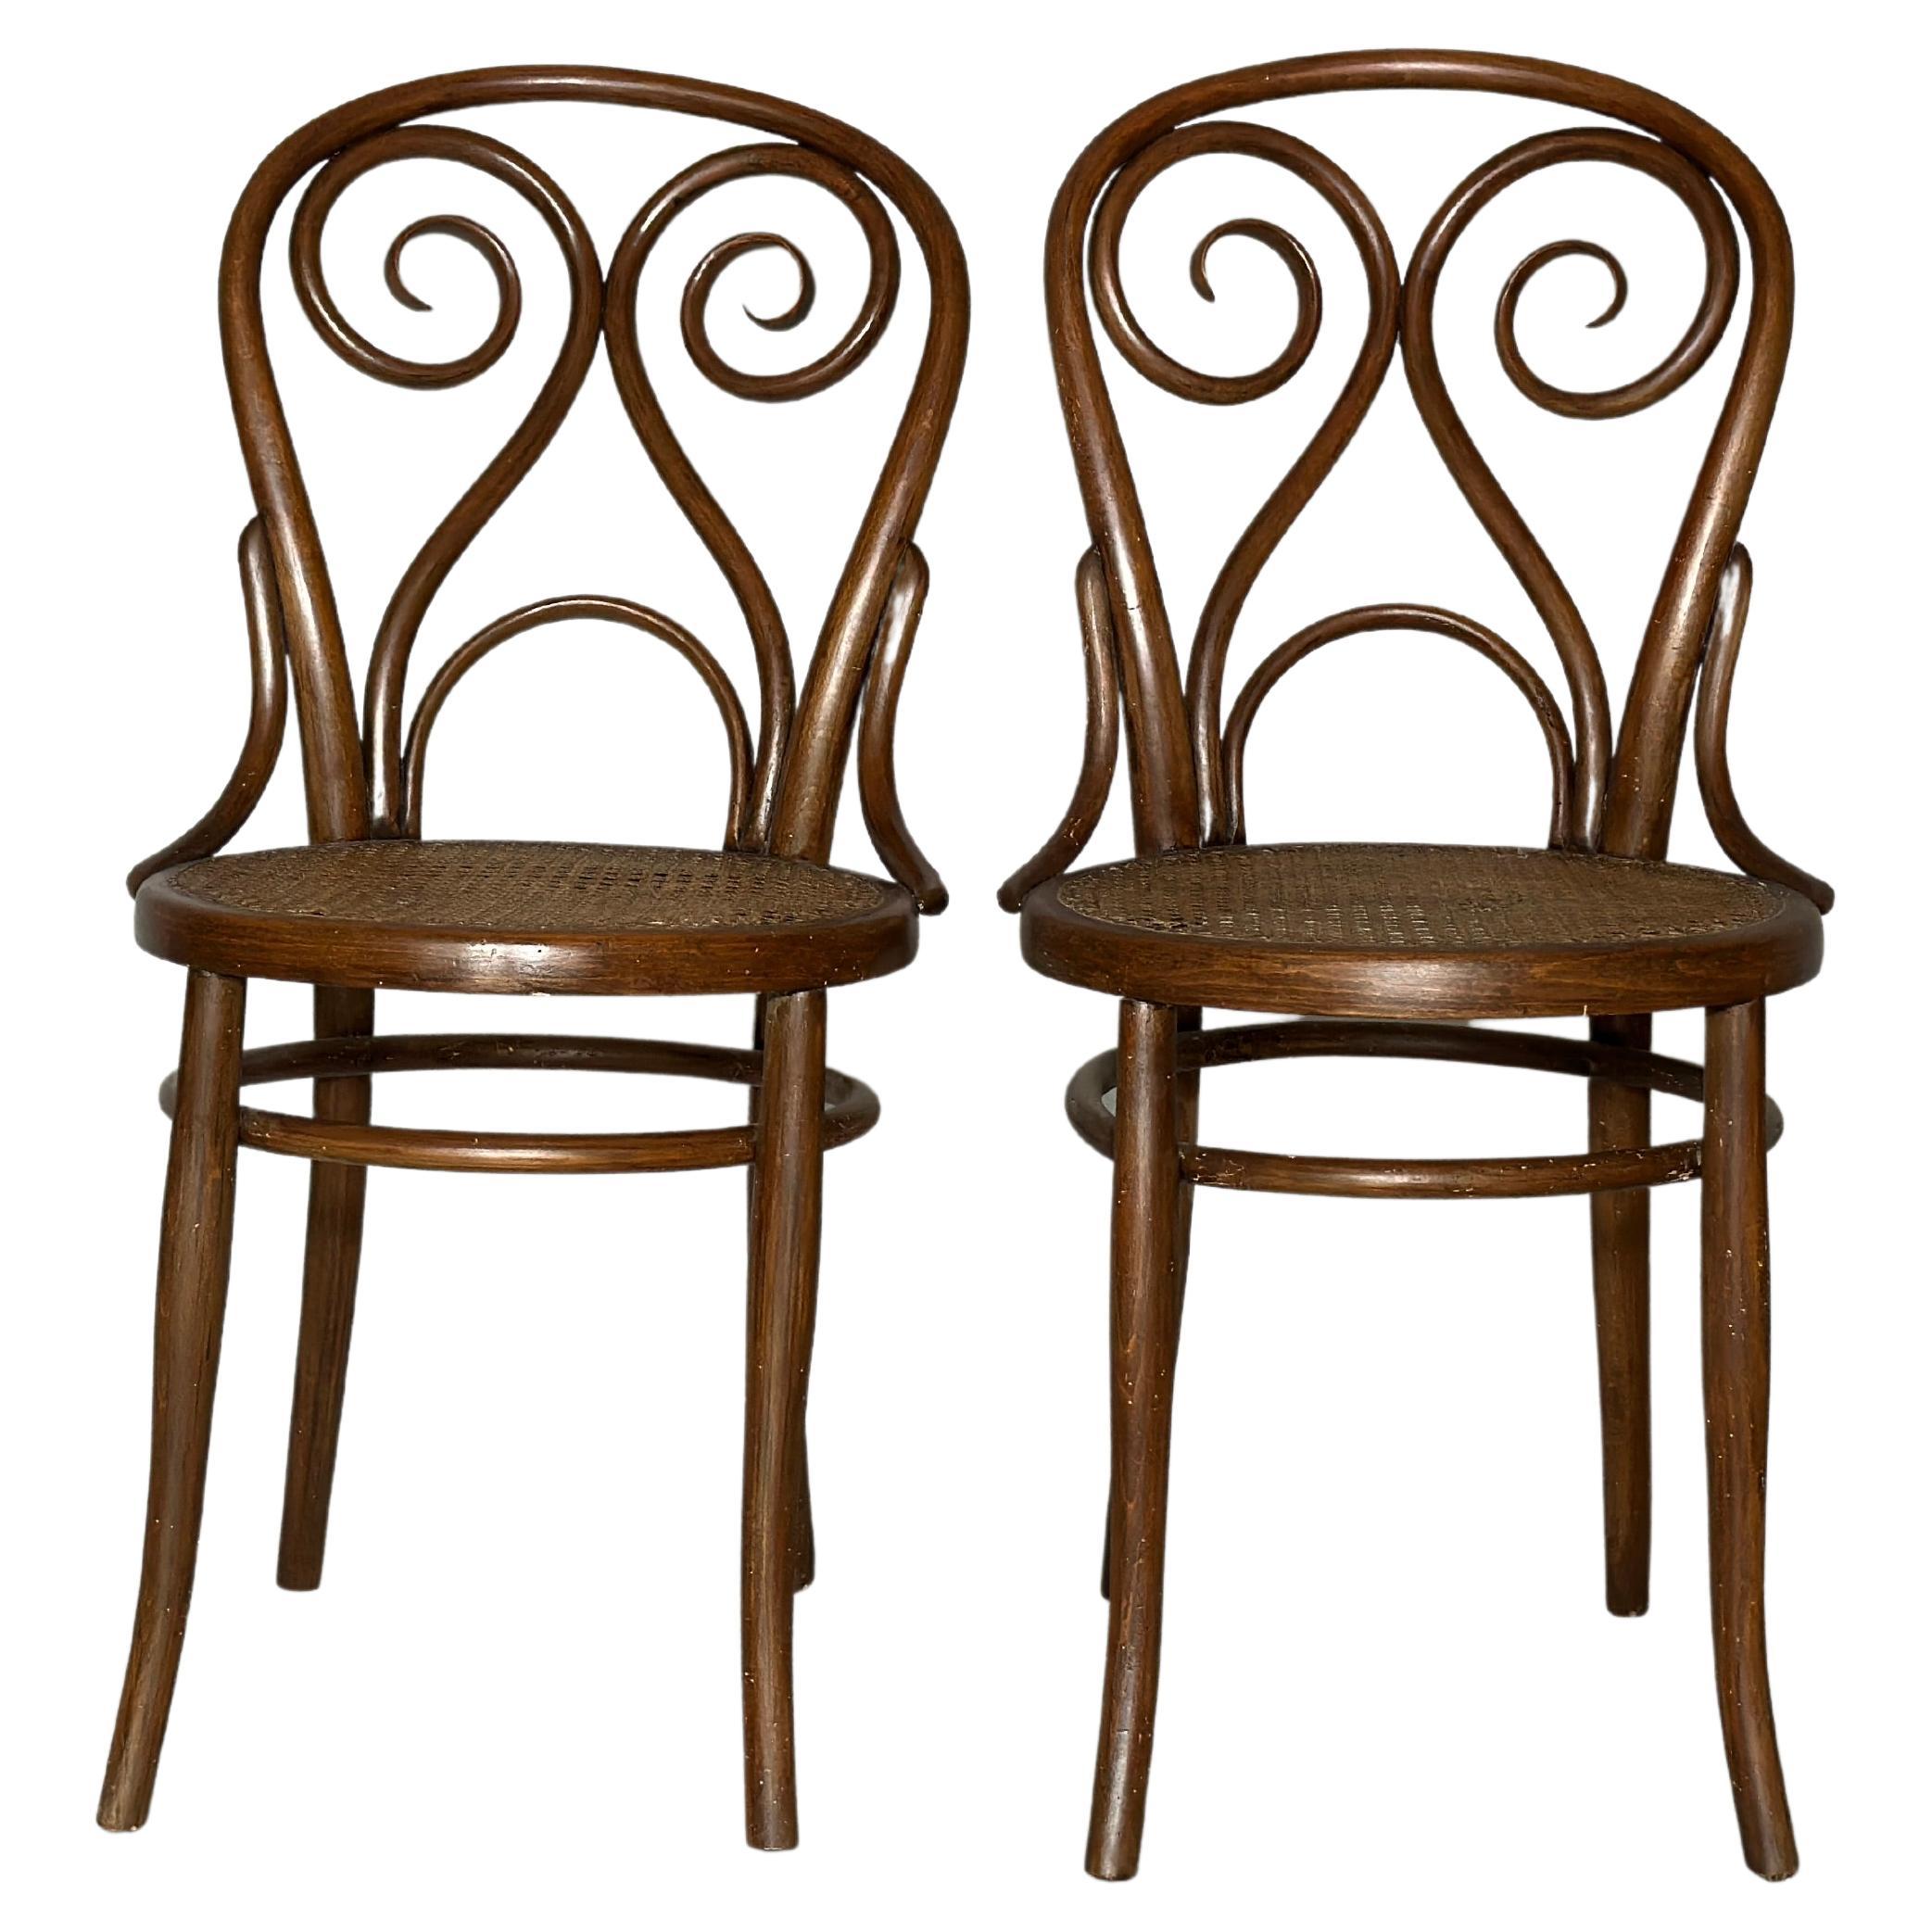 Harnisch and Co chair Wiena 1880s  Set of Two